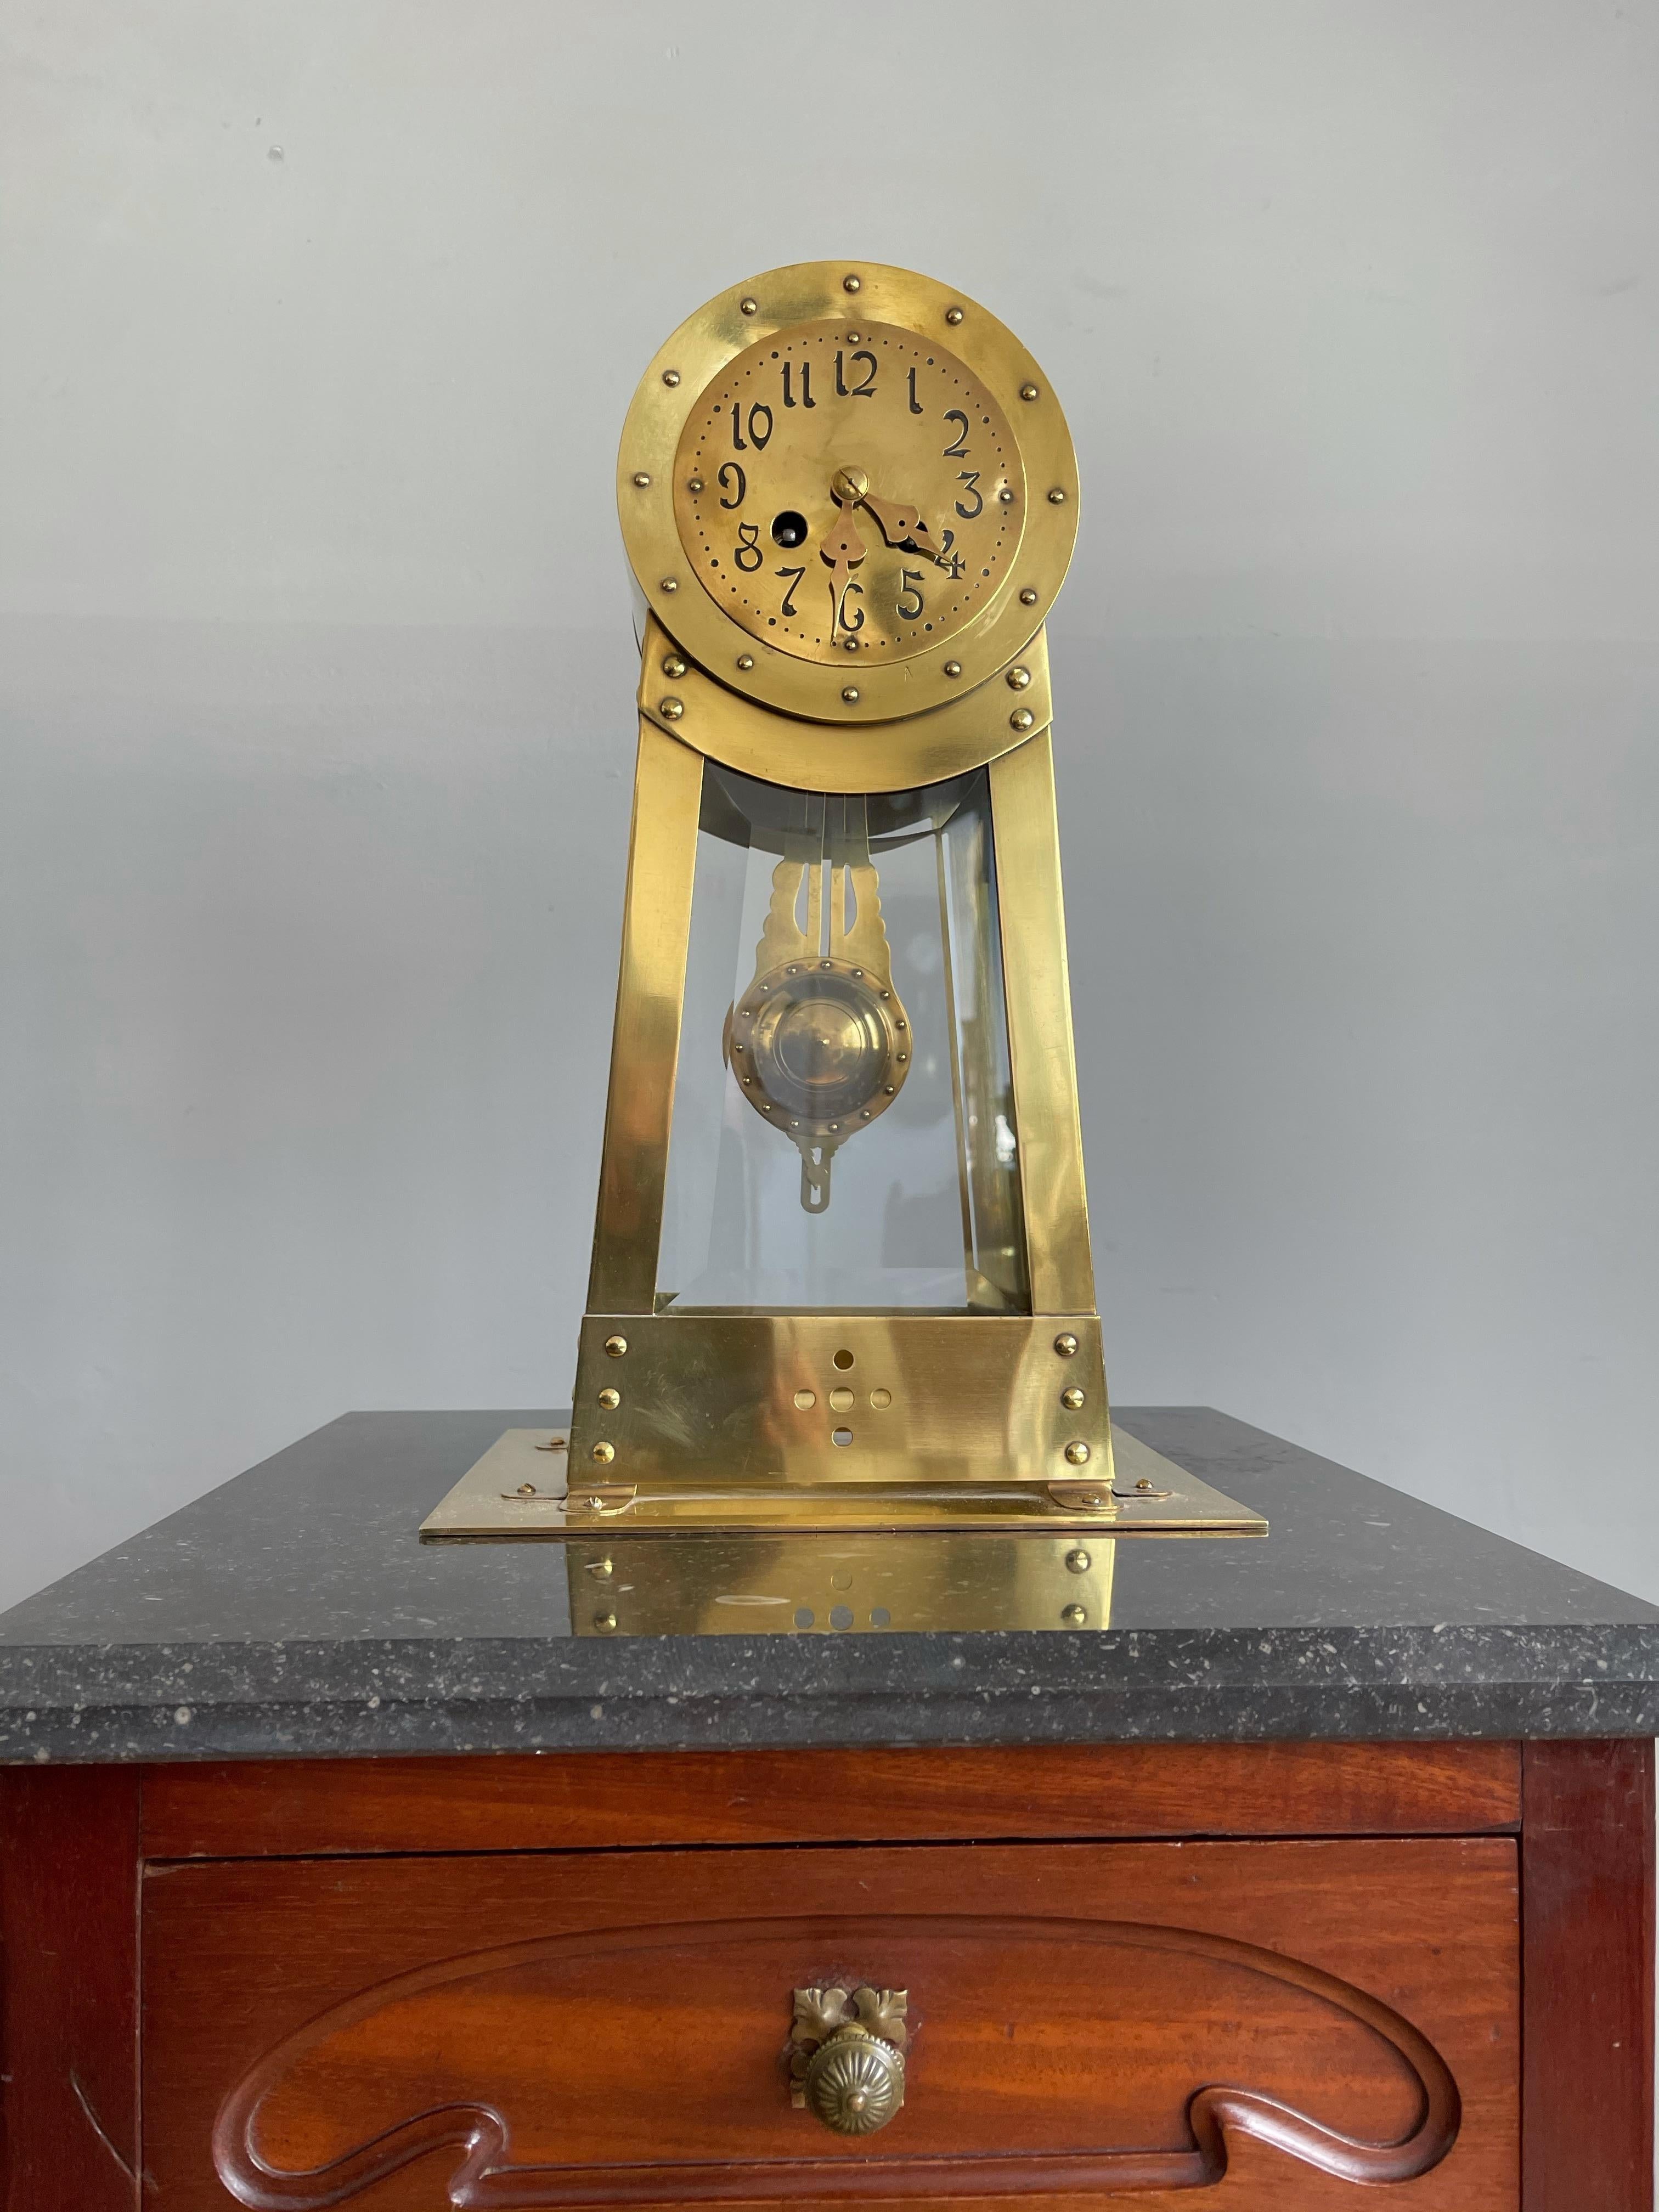 Unique design clock for the collectors of timeless antiques.

Finding this unique Arts & Crafts Dutch desk / table clock truly felt like a blessing. The overall design is remarkable, but the combination of the craftsmanship of the hammered brass and